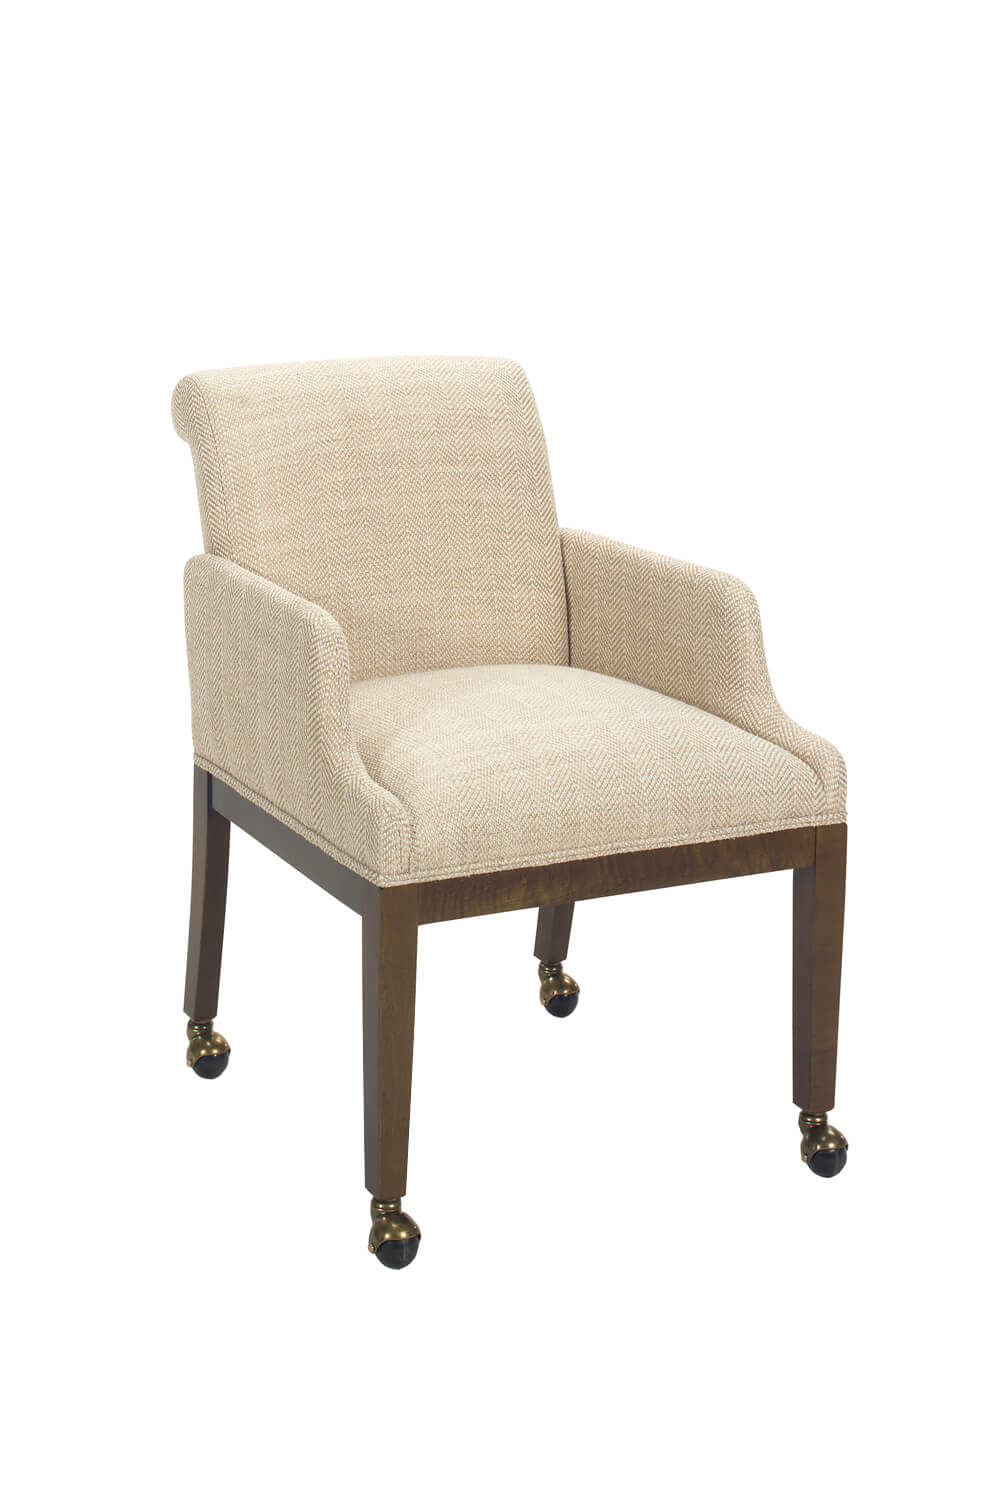 2110C Transitional Upholstered Wood Game Dining Arm Chair with Casters